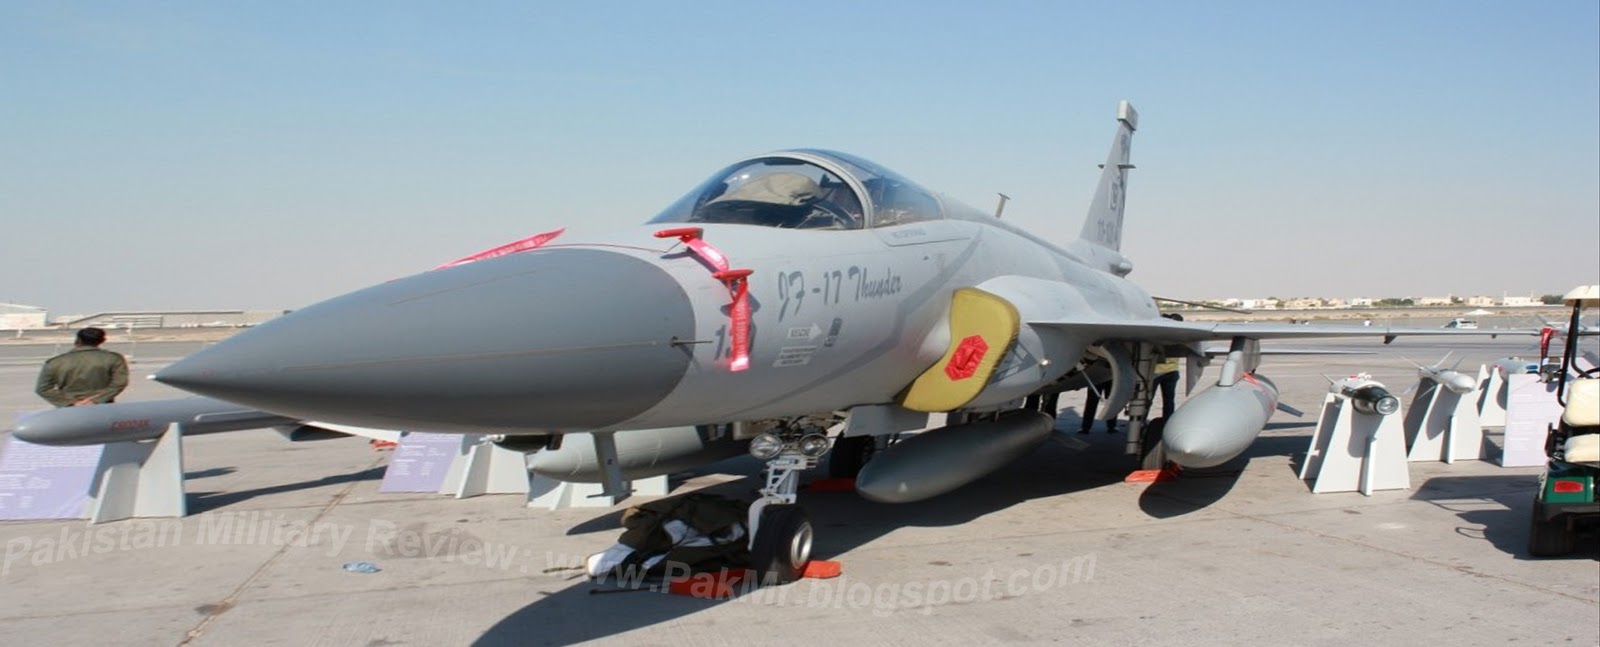 JF-17+Thunder+airshowPakistan+Air+Force+PAF+rd-93+improved+ws13+fighter+jet+air+show+C-802A+Anti-ship+Missile+SD-10A+BVRAAM+PL-5E+II+WVRAAM+and+500+kg+LS-6+Satellite+bomb+block+II+I+.jpg